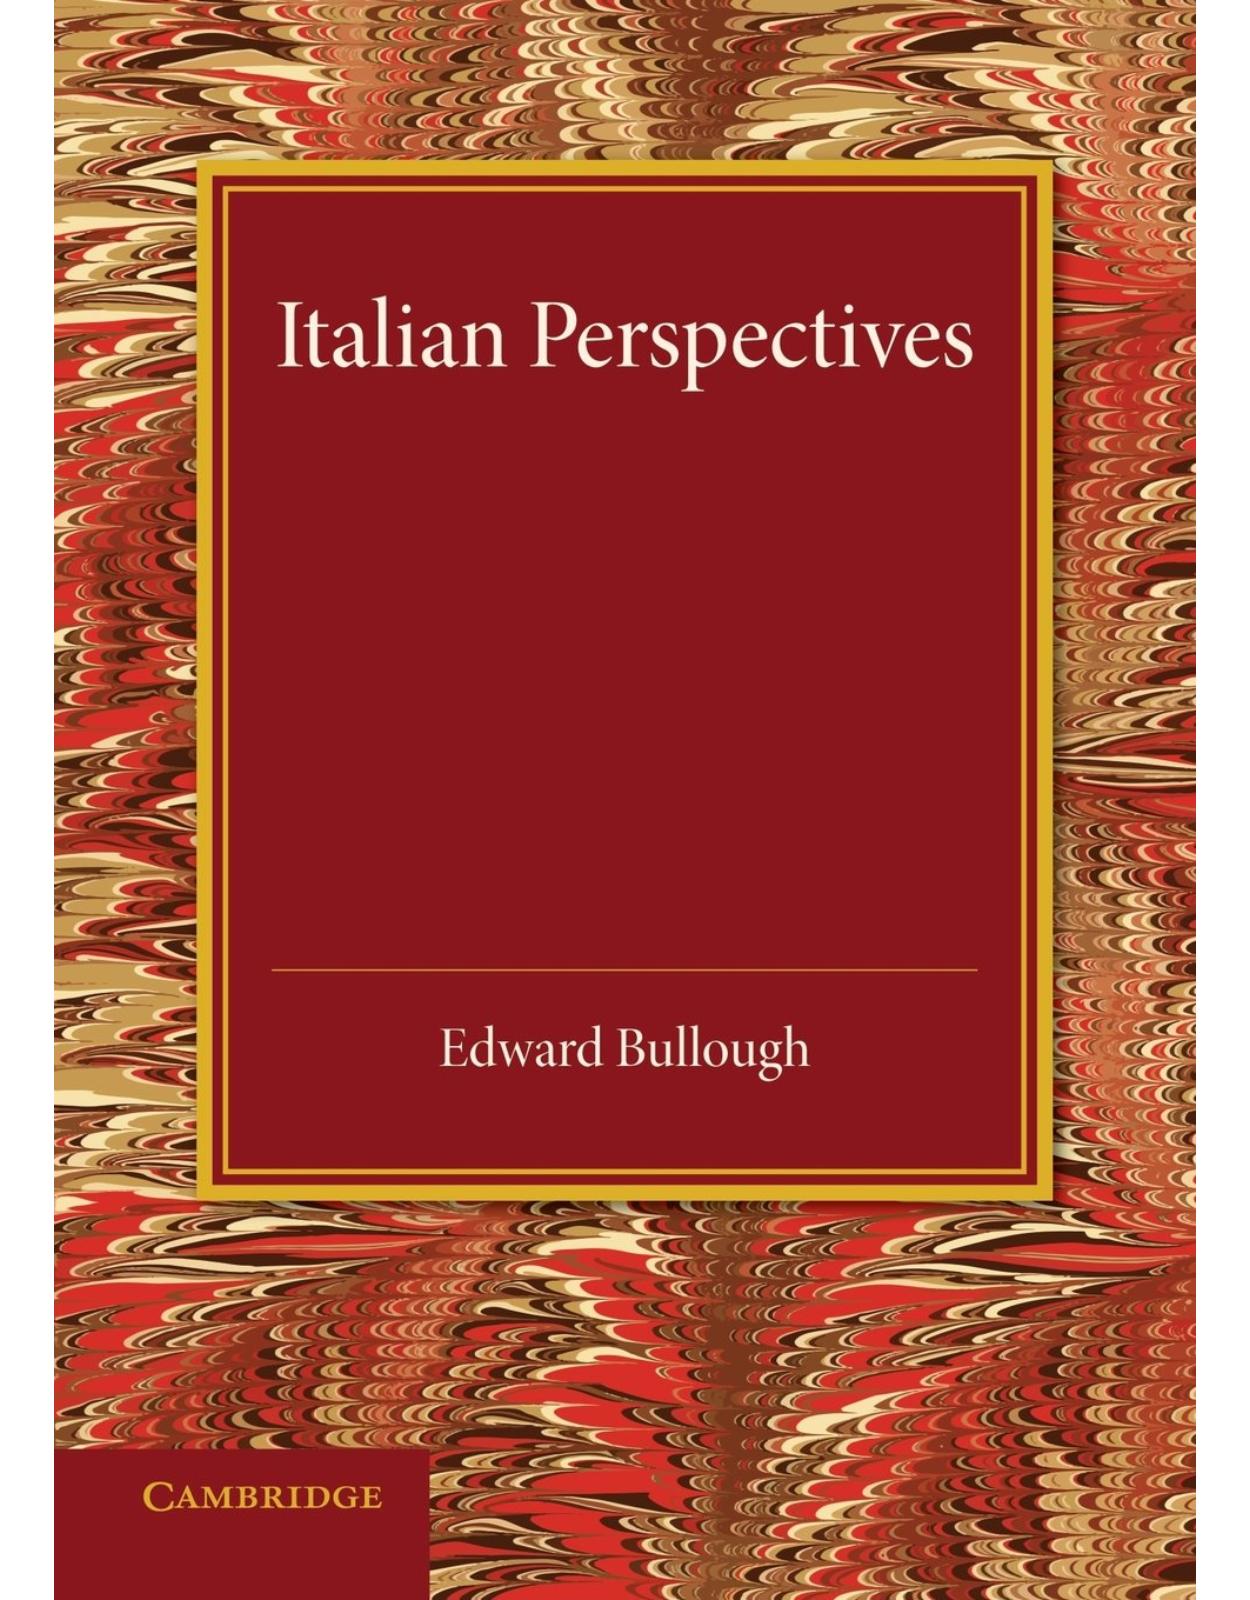 Italian Perspectives: An Inaugural Lecture